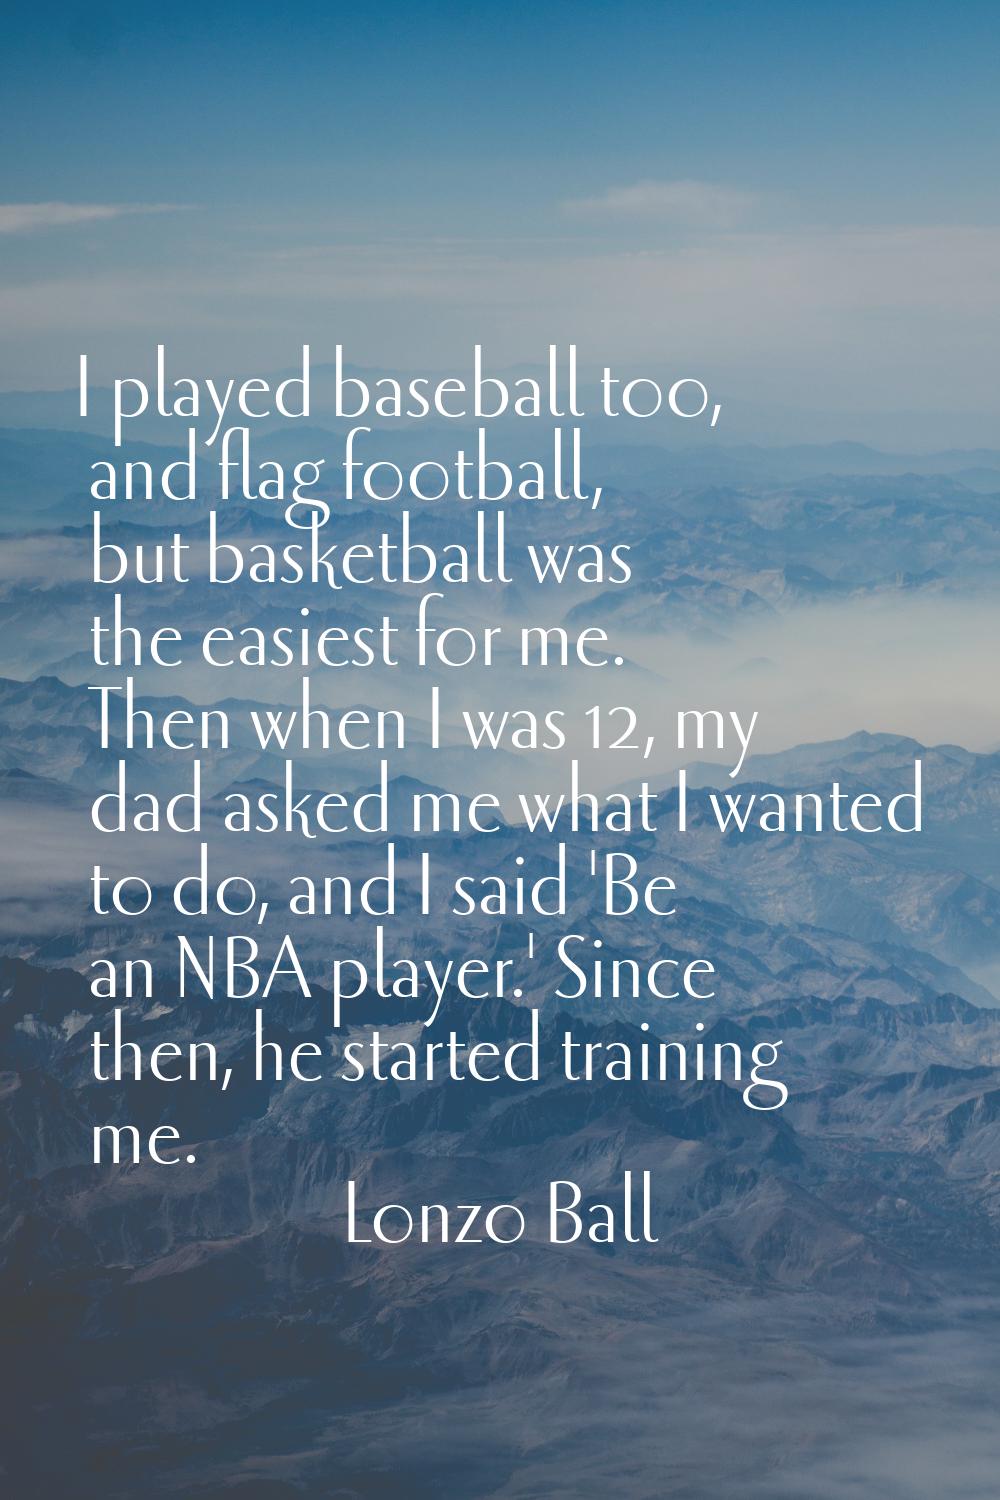 I played baseball too, and flag football, but basketball was the easiest for me. Then when I was 12